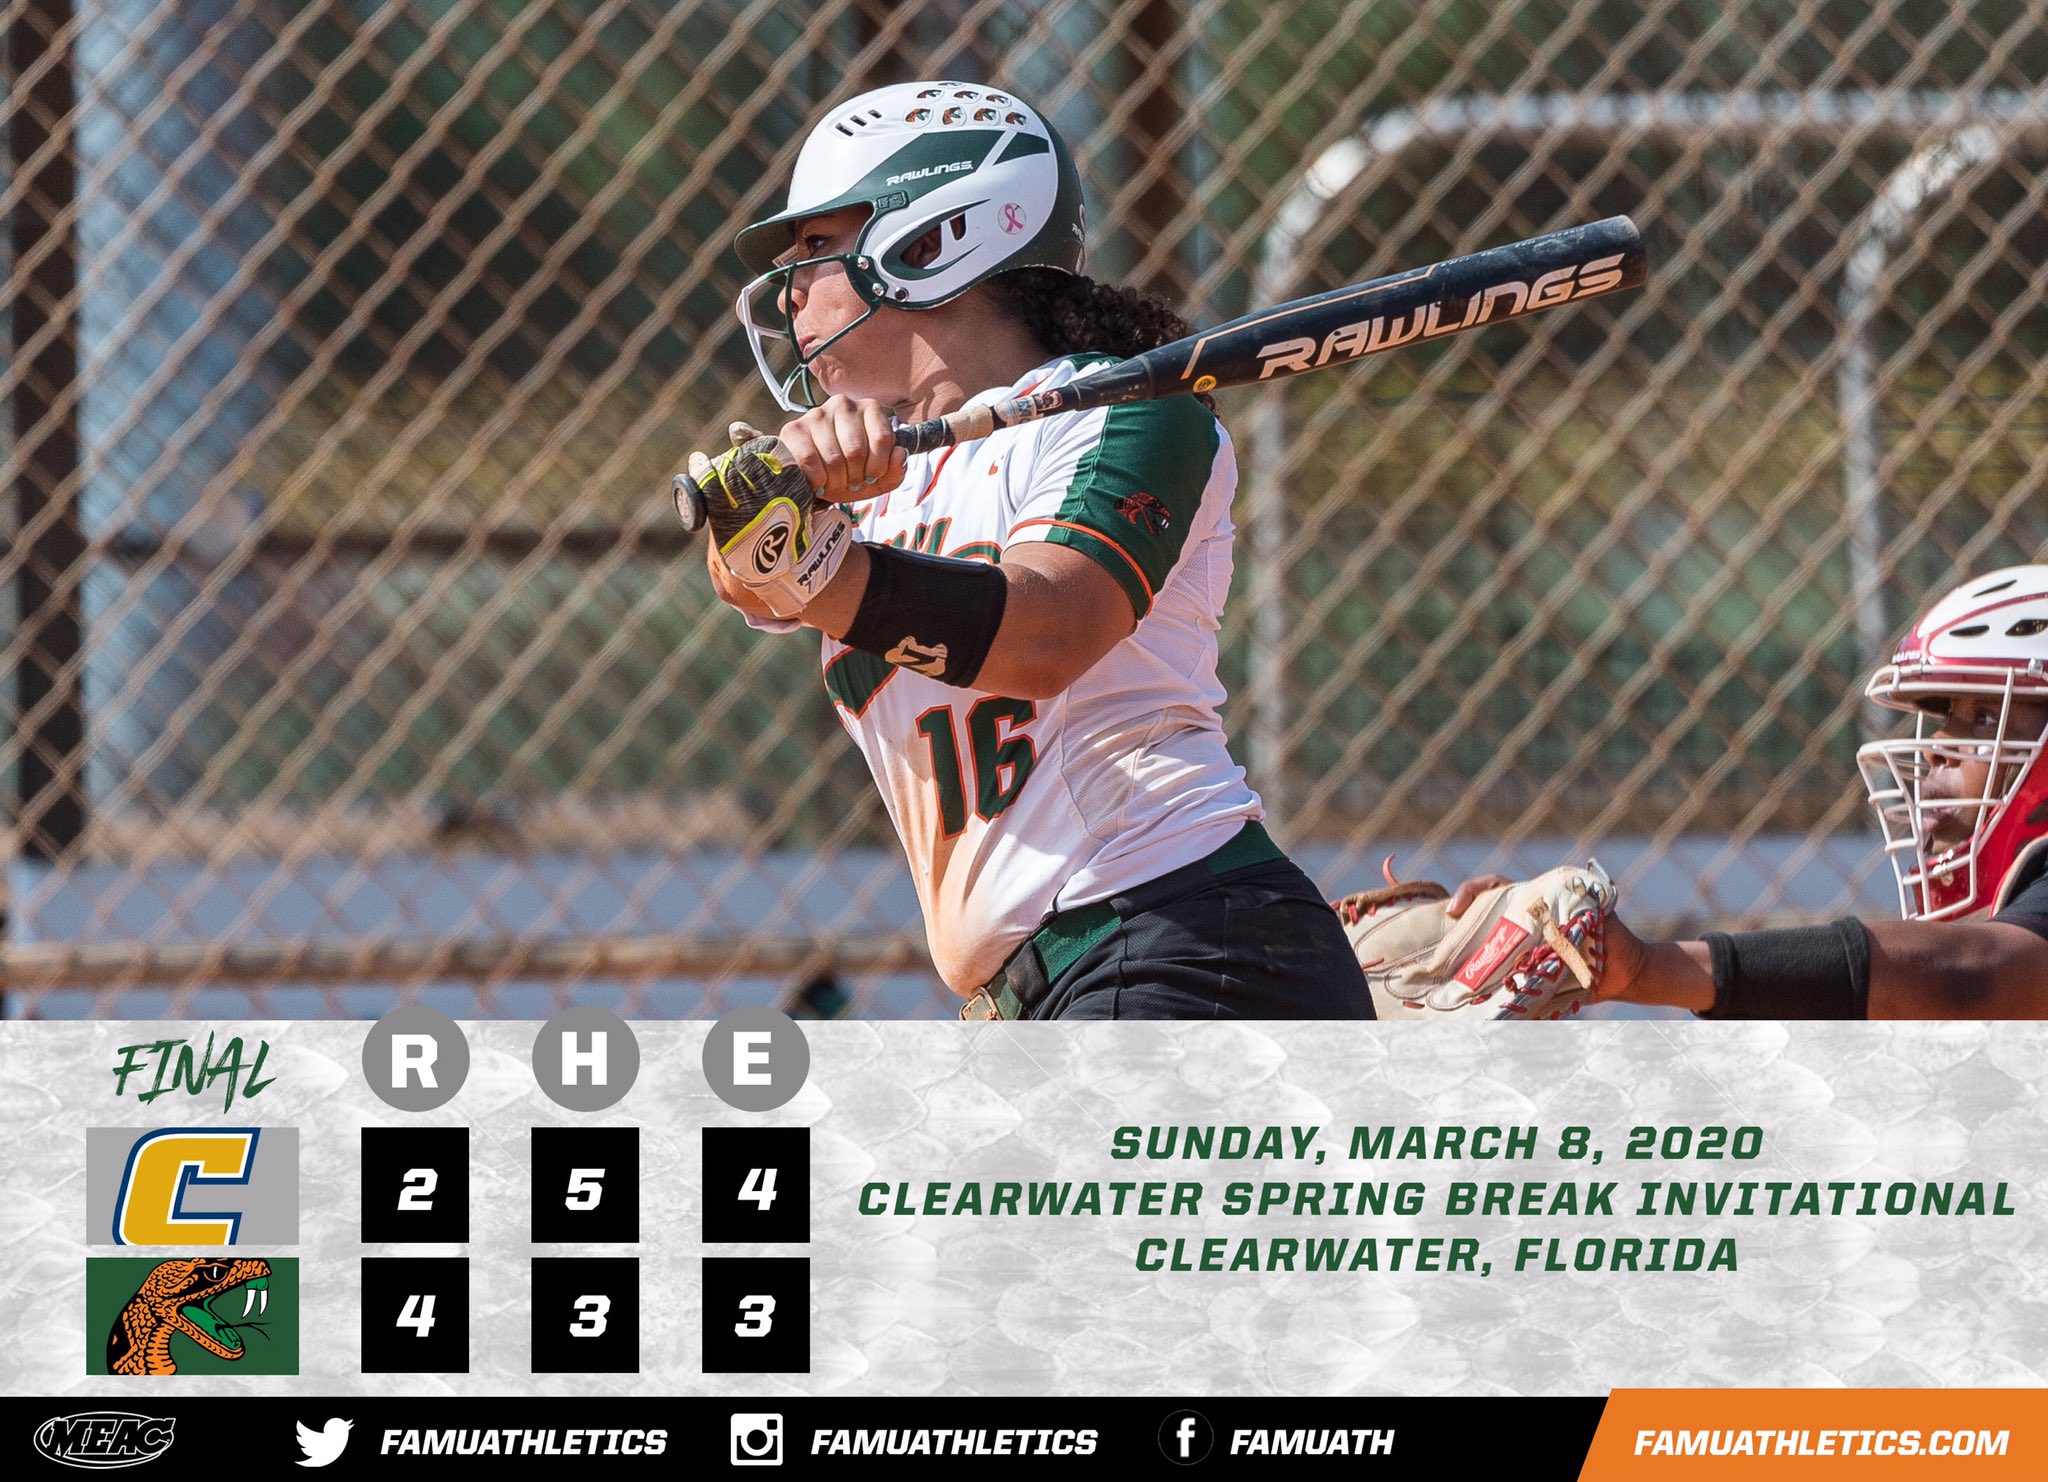 Florida A&M Athletics on Twitter "FAMU softball ends Clearwater Spring